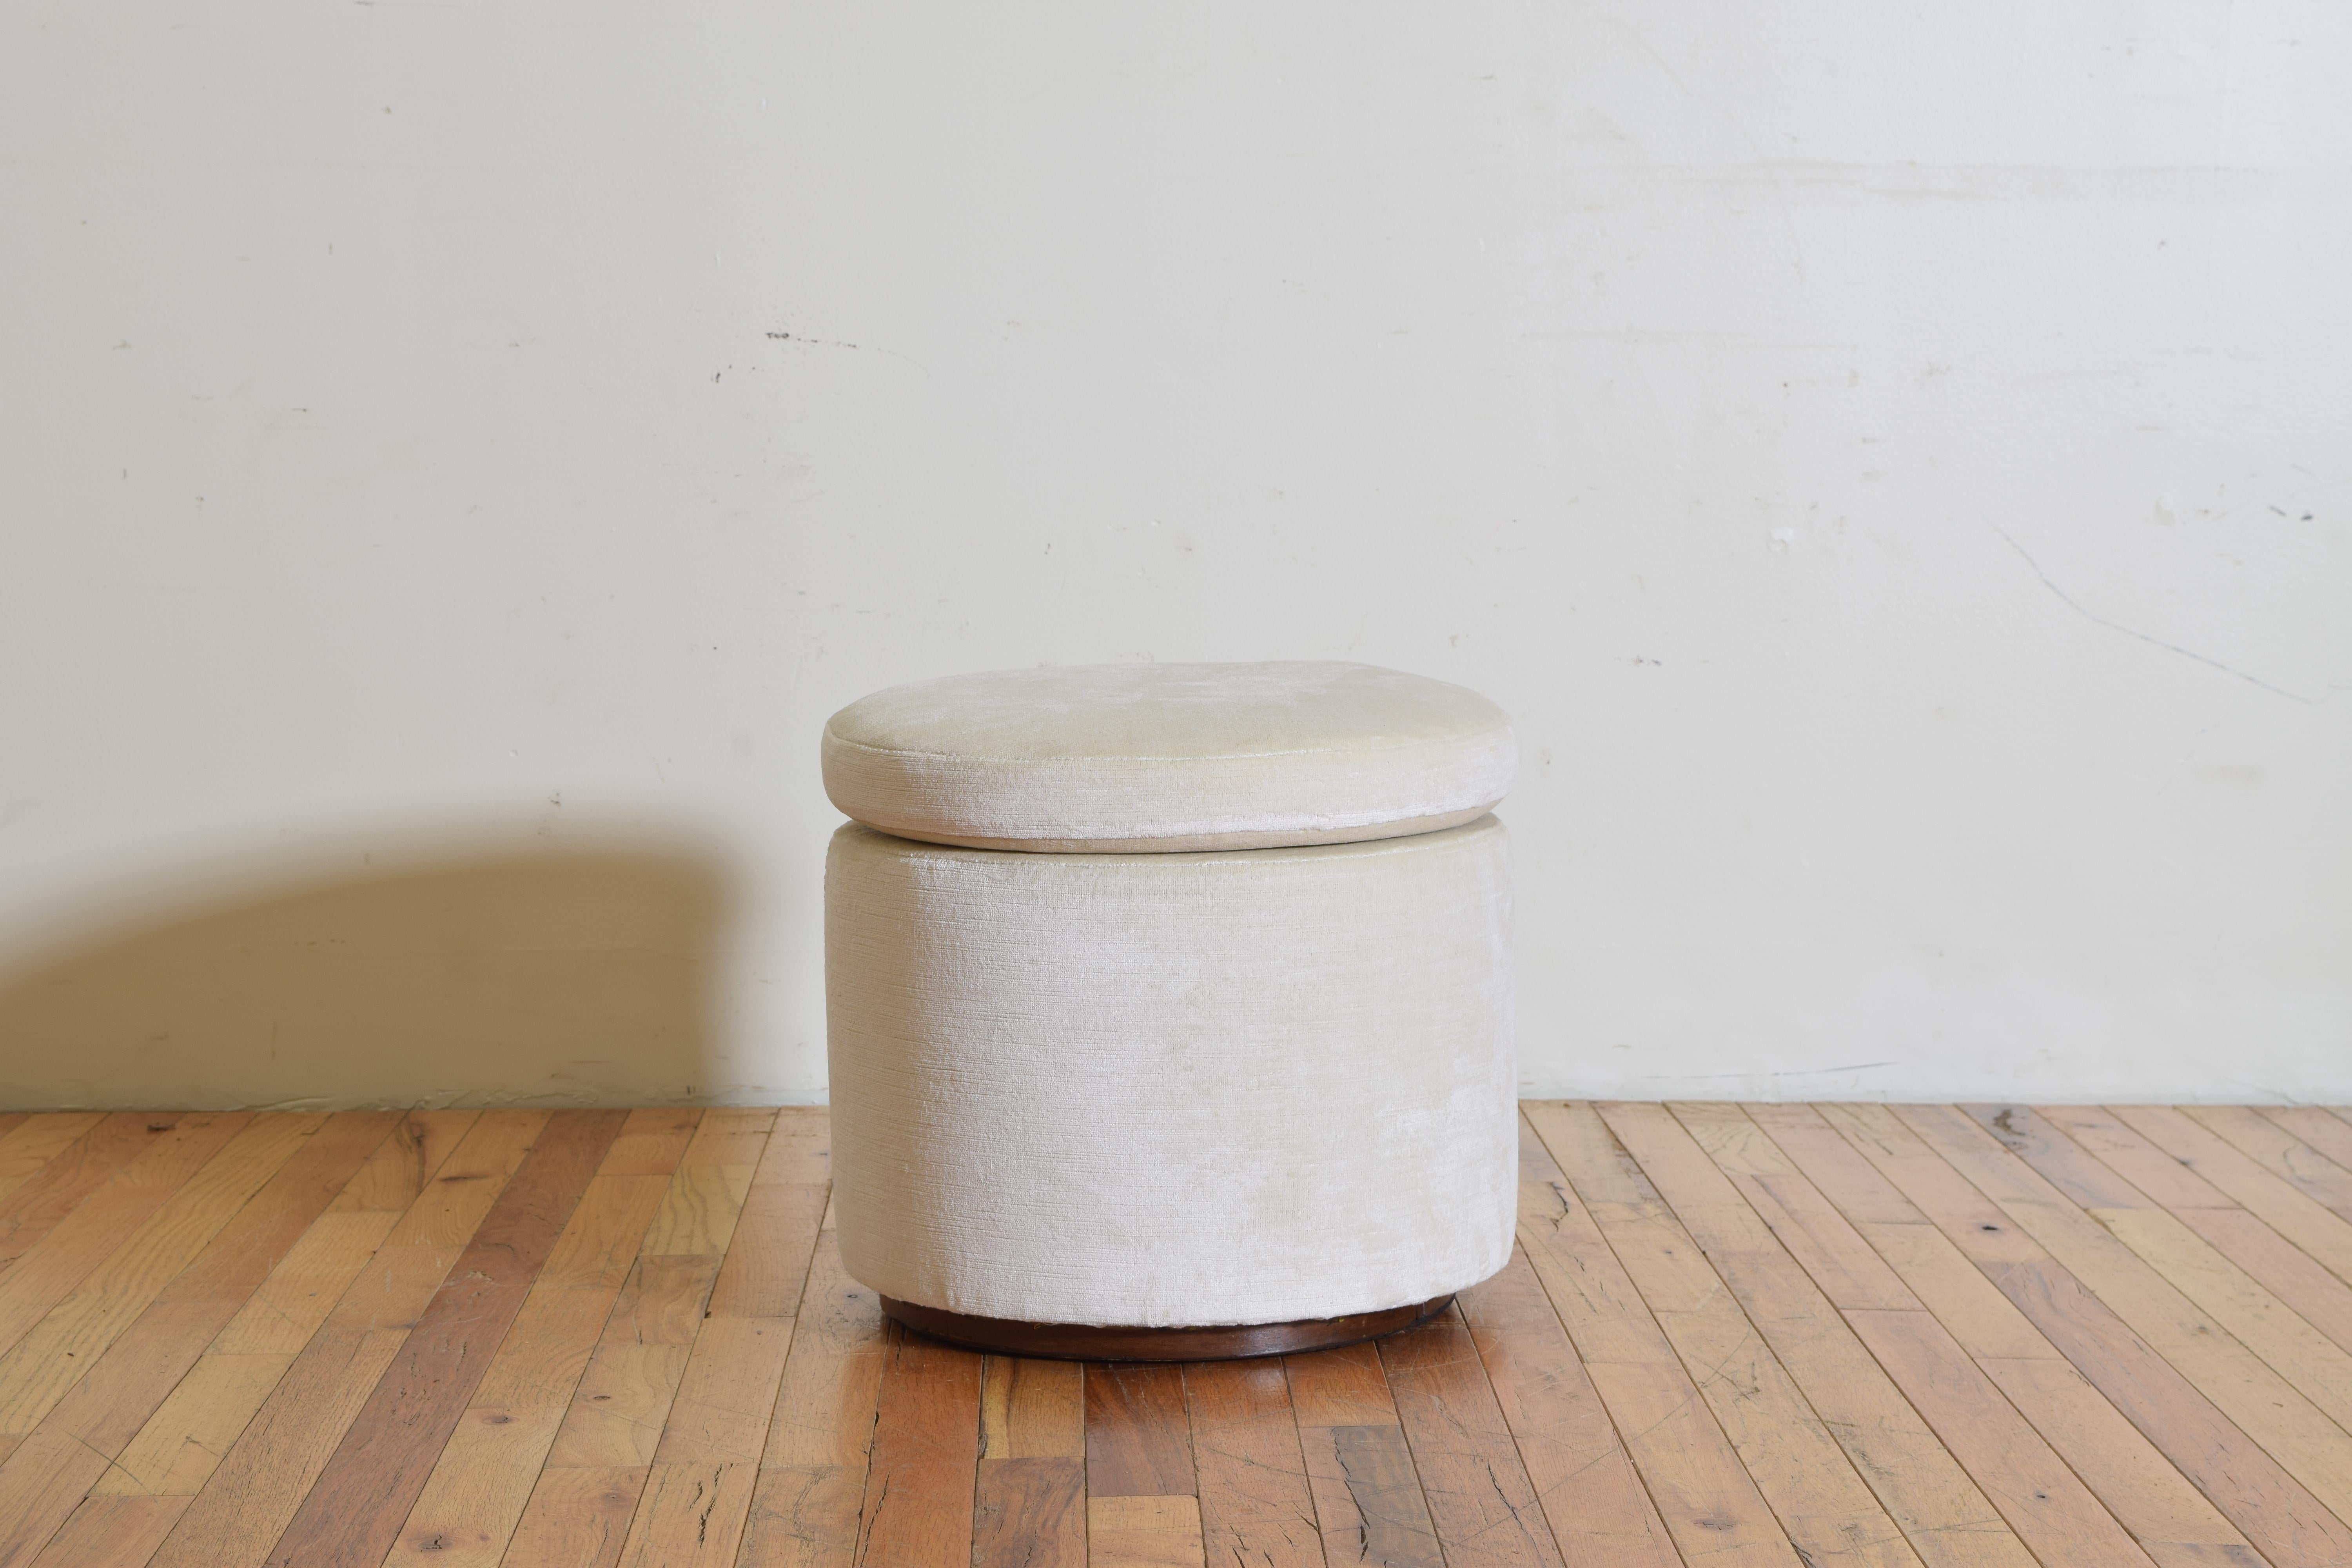 Of cylindrical form with an upholstered body, loose cushion, and a band of walnut veneer on a slightly recessed base, second quarter of the 20th century.